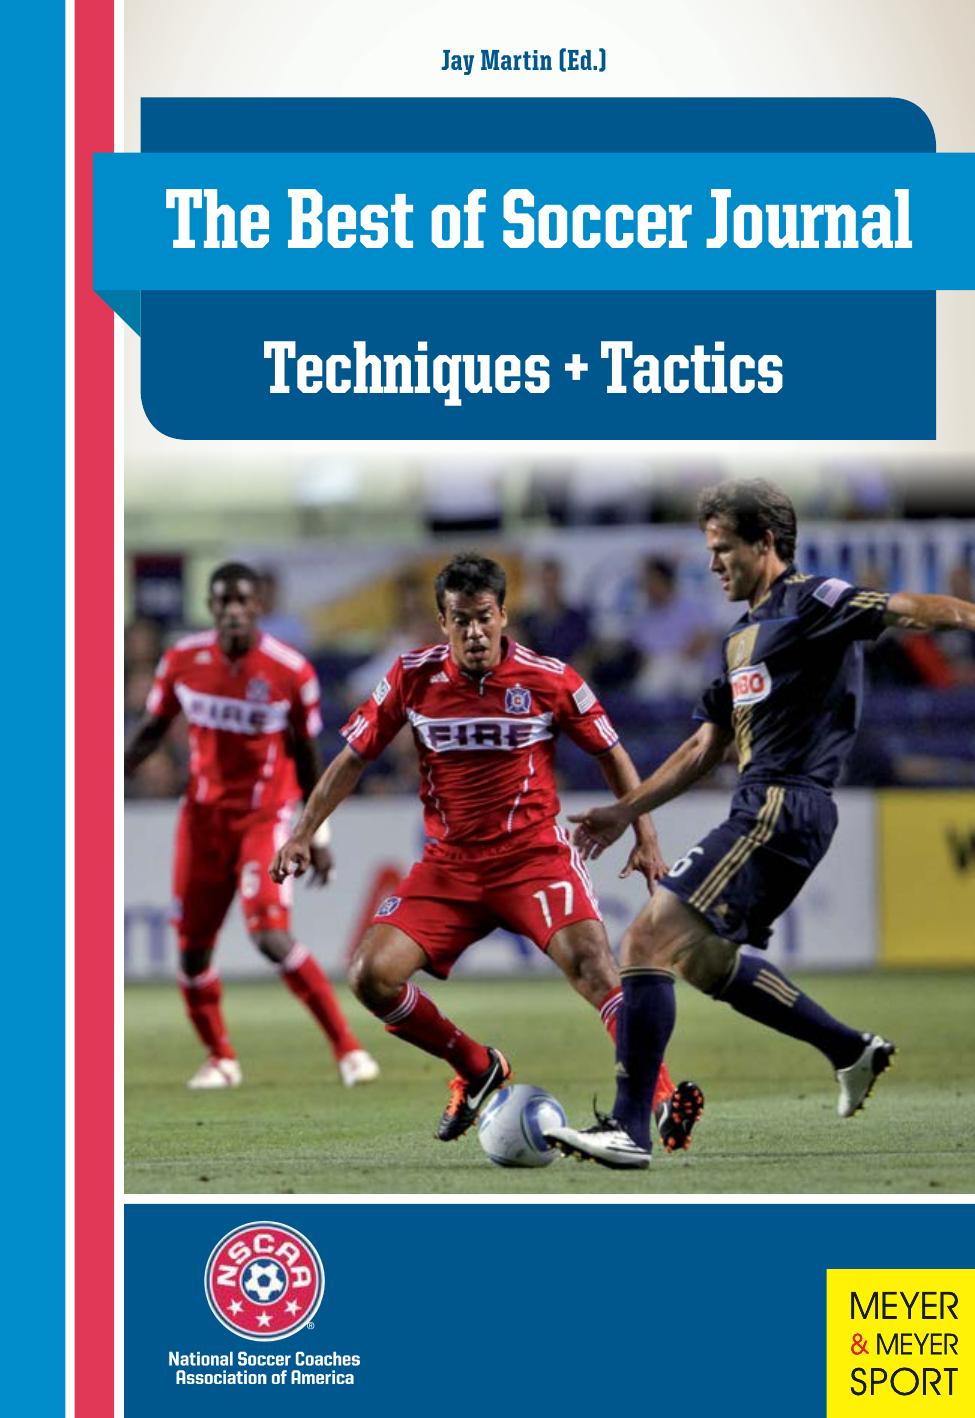 The Best of Soccer Journal: Techniques & Tactics